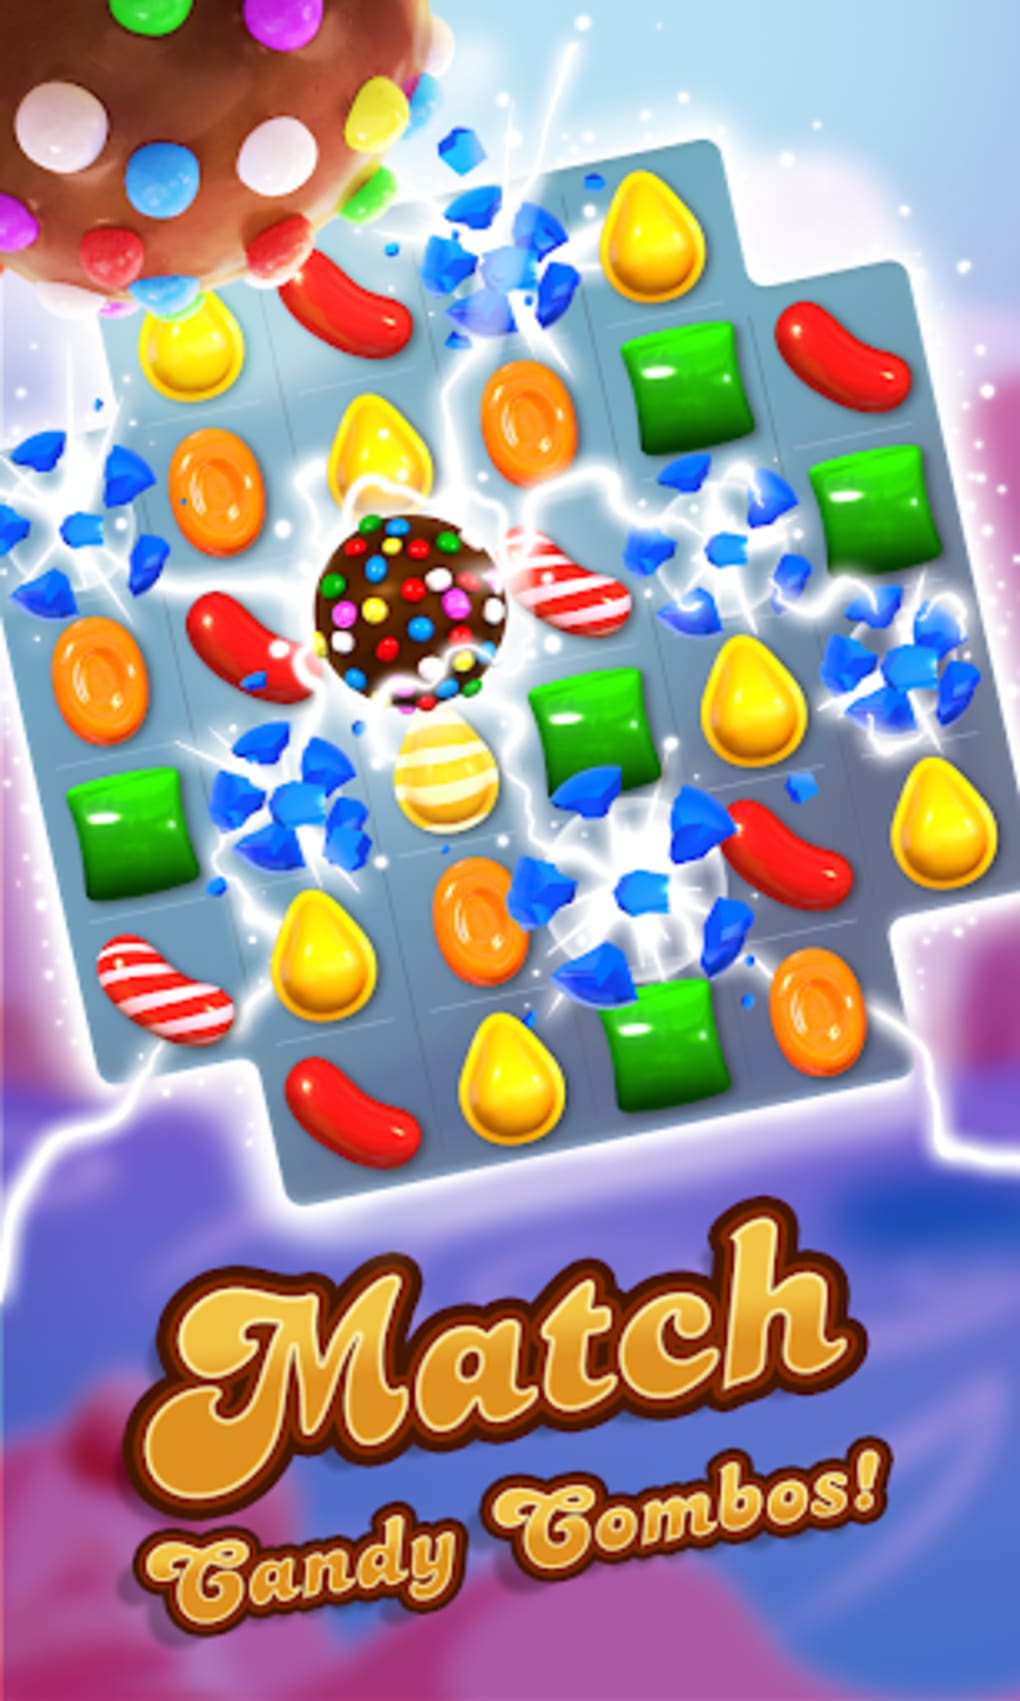 candycrush app download